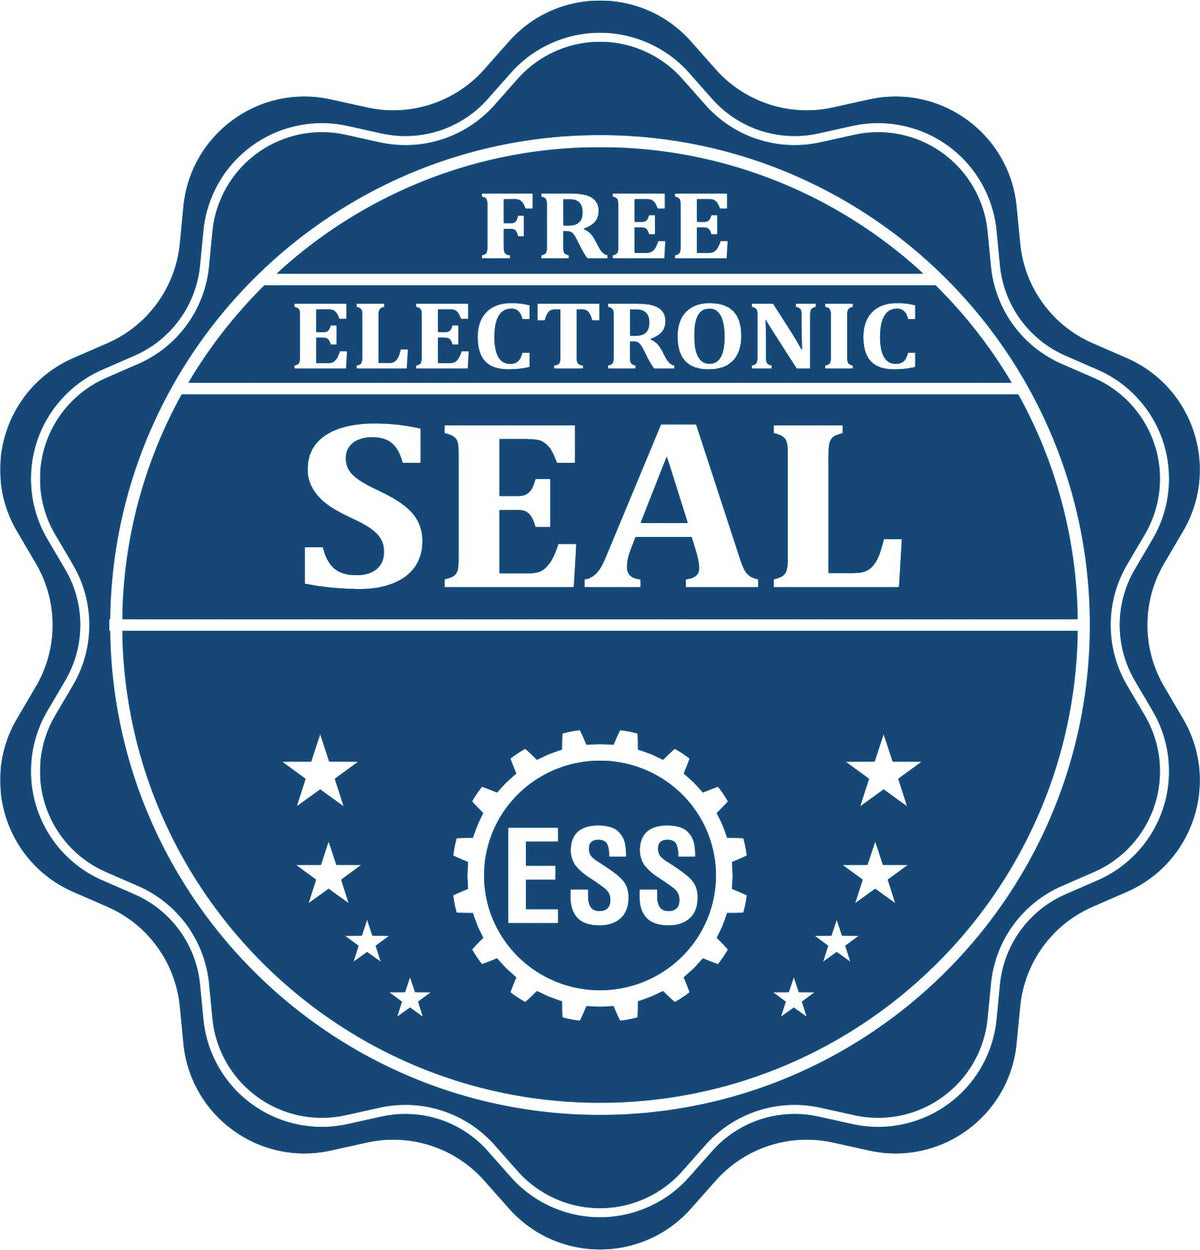 A badge showing a free electronic seal for the Gift Maine Geologist Seal with stars and the ESS gear on the emblem.